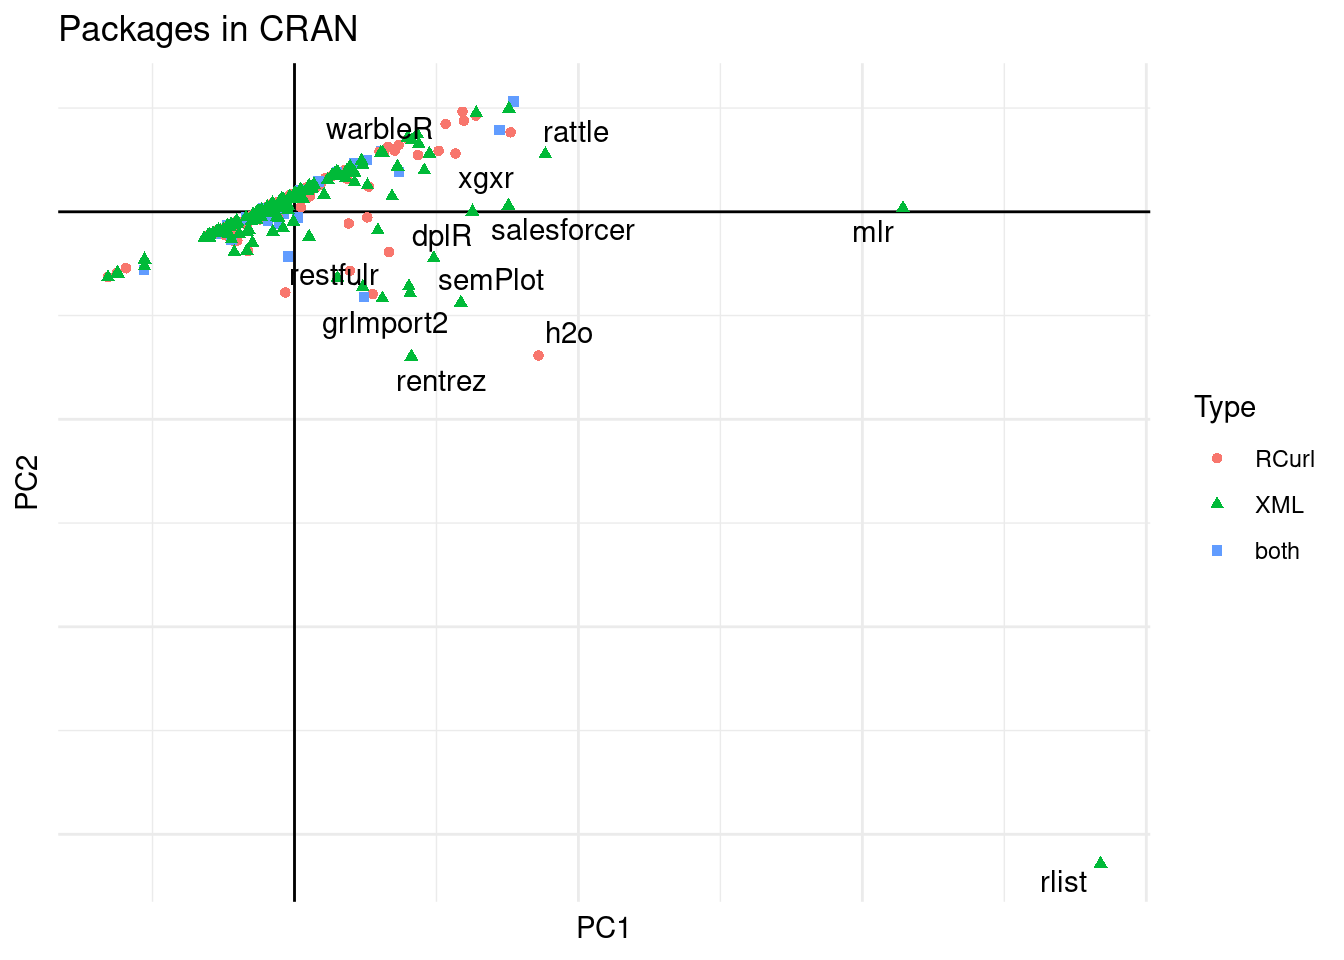 PCA of packages on CRAN.